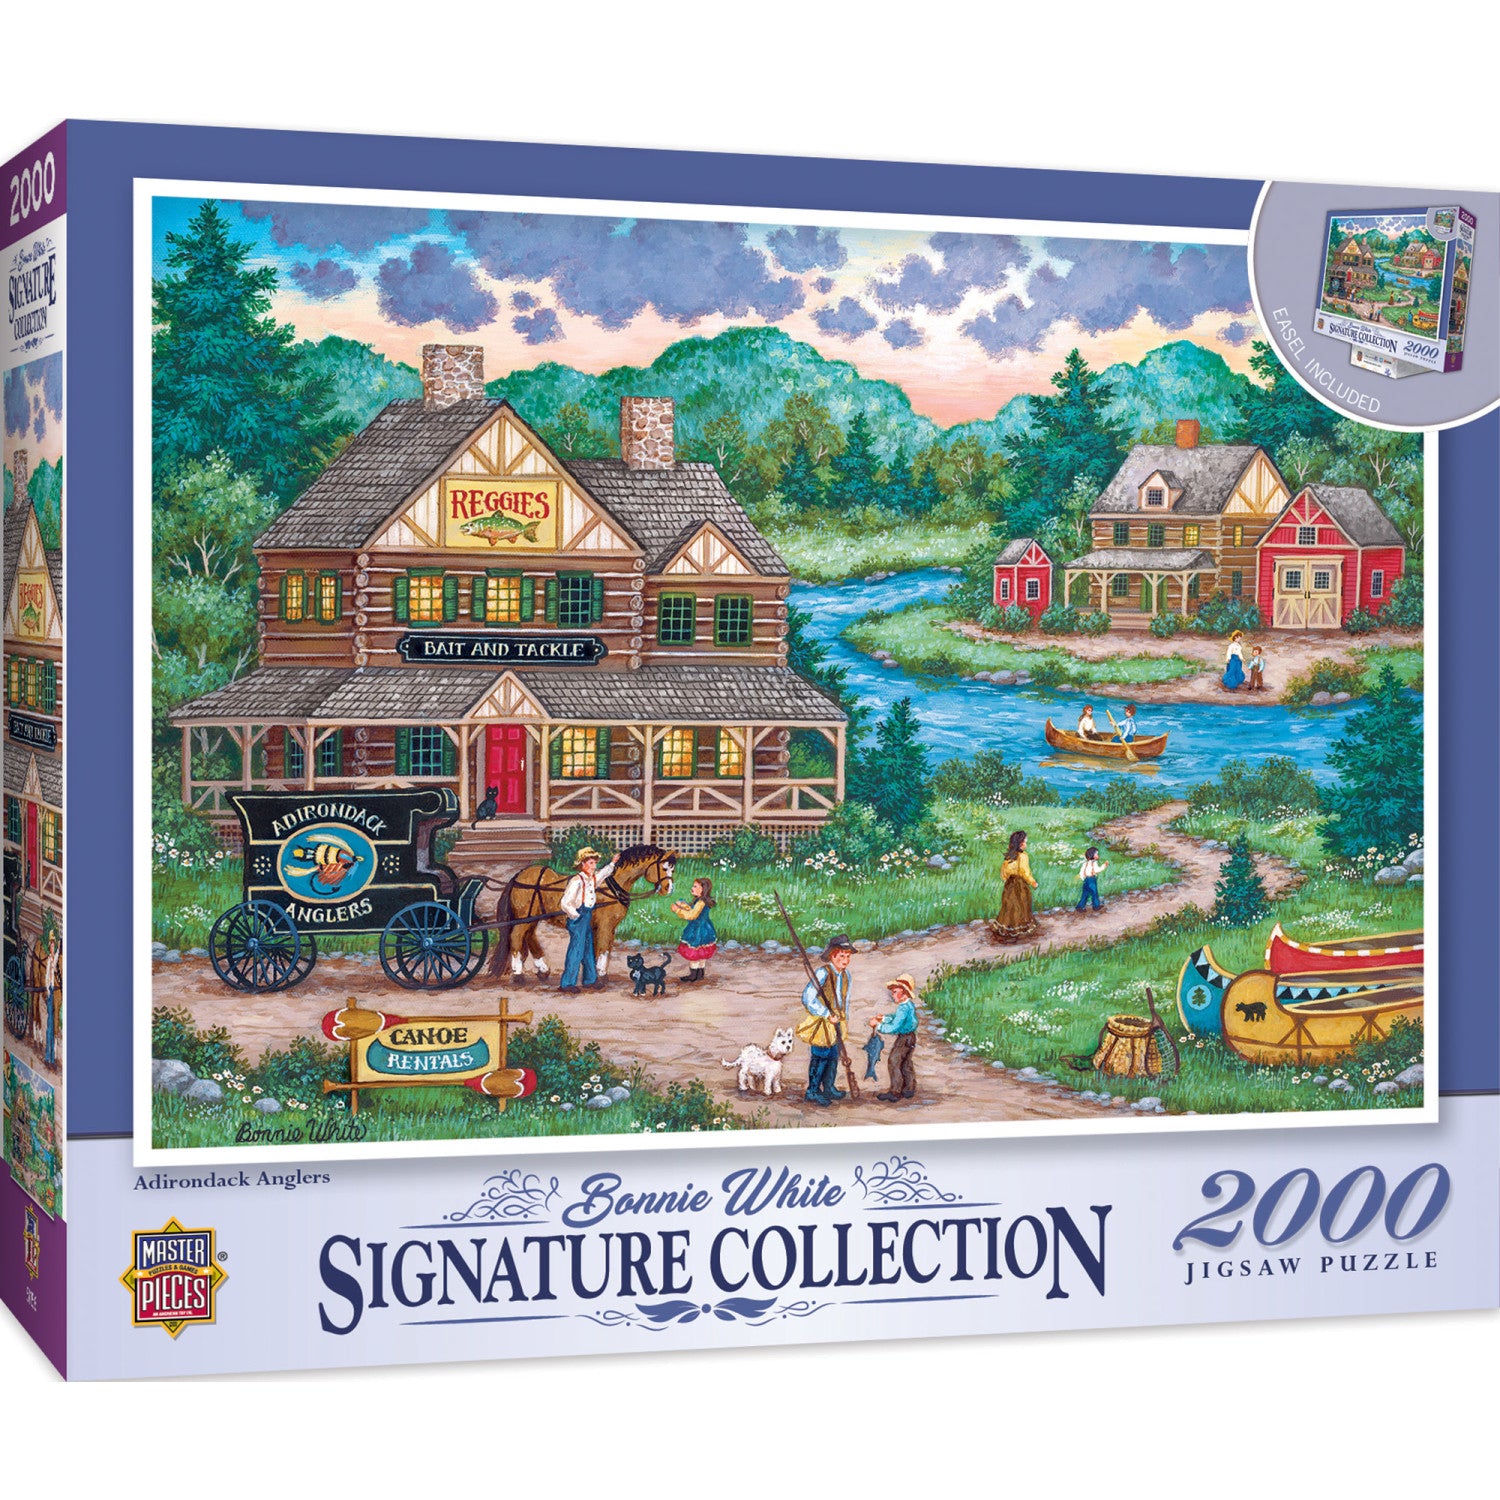 Signature Collection - Adirondack Anglers 2000 Piece Jigsaw Puzzle